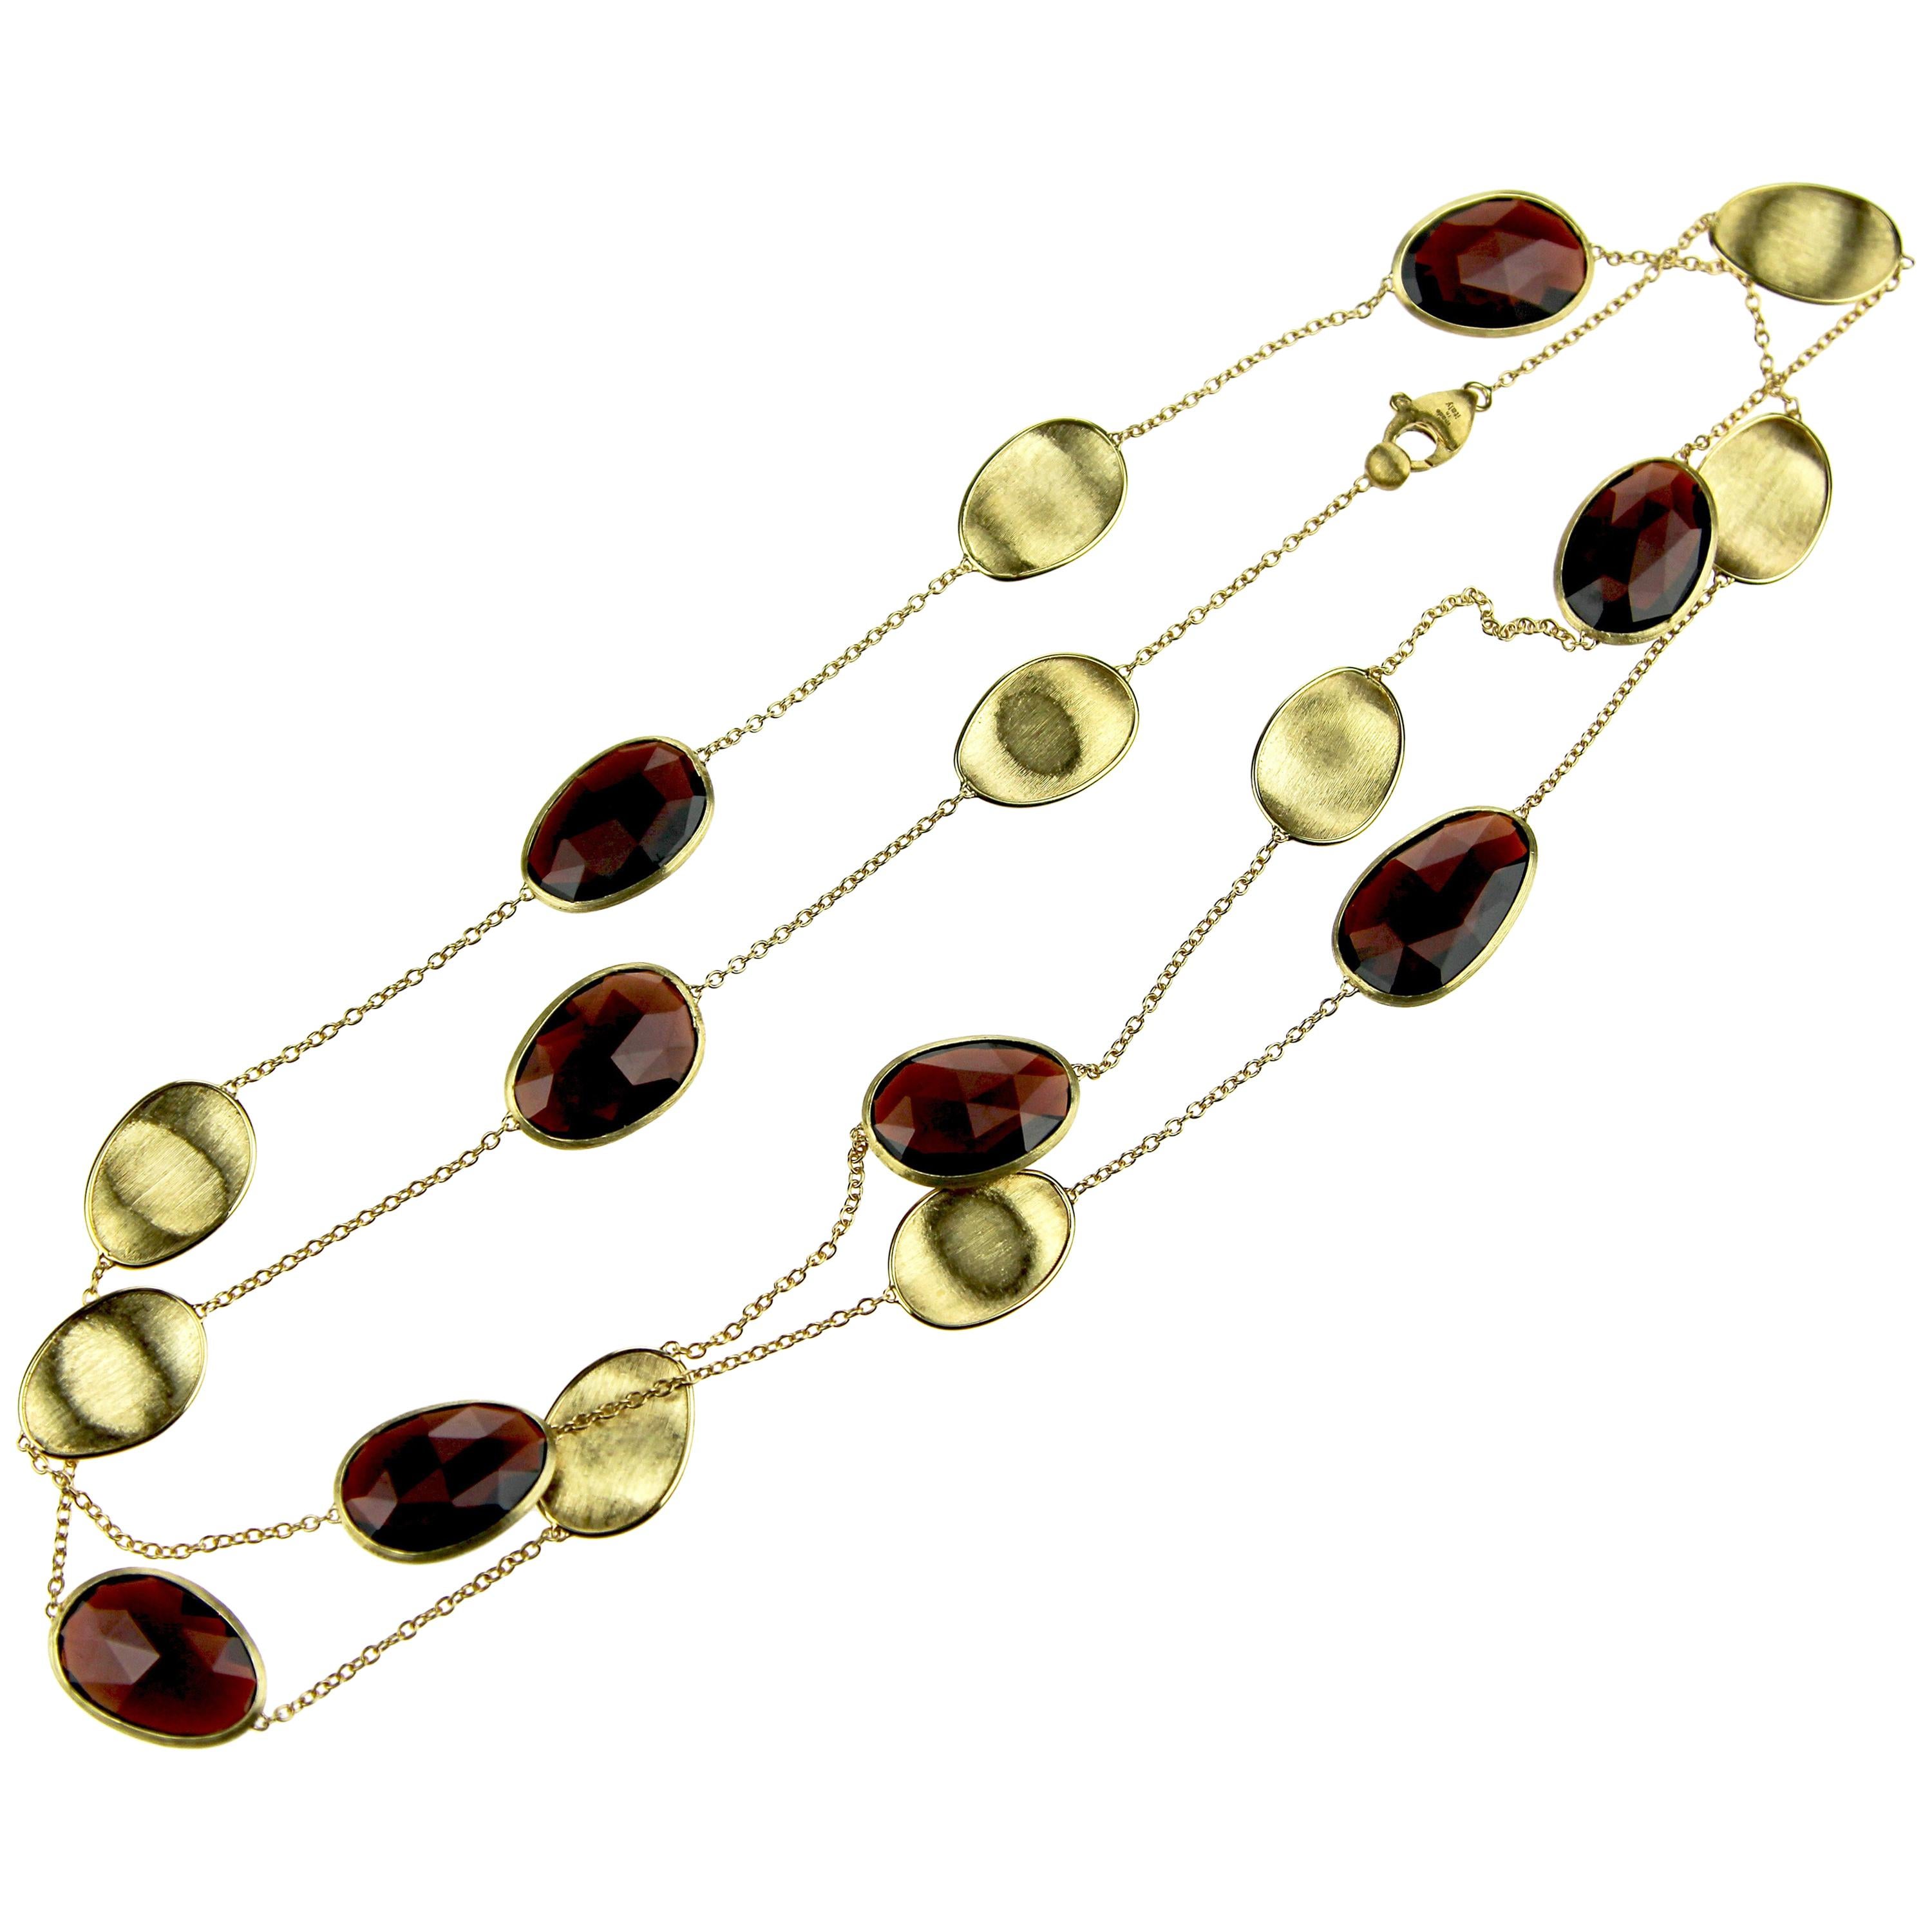 Marco Bicego 18 Karat Gold Lunaria One-of-a-Kind Long Necklace with Garnet